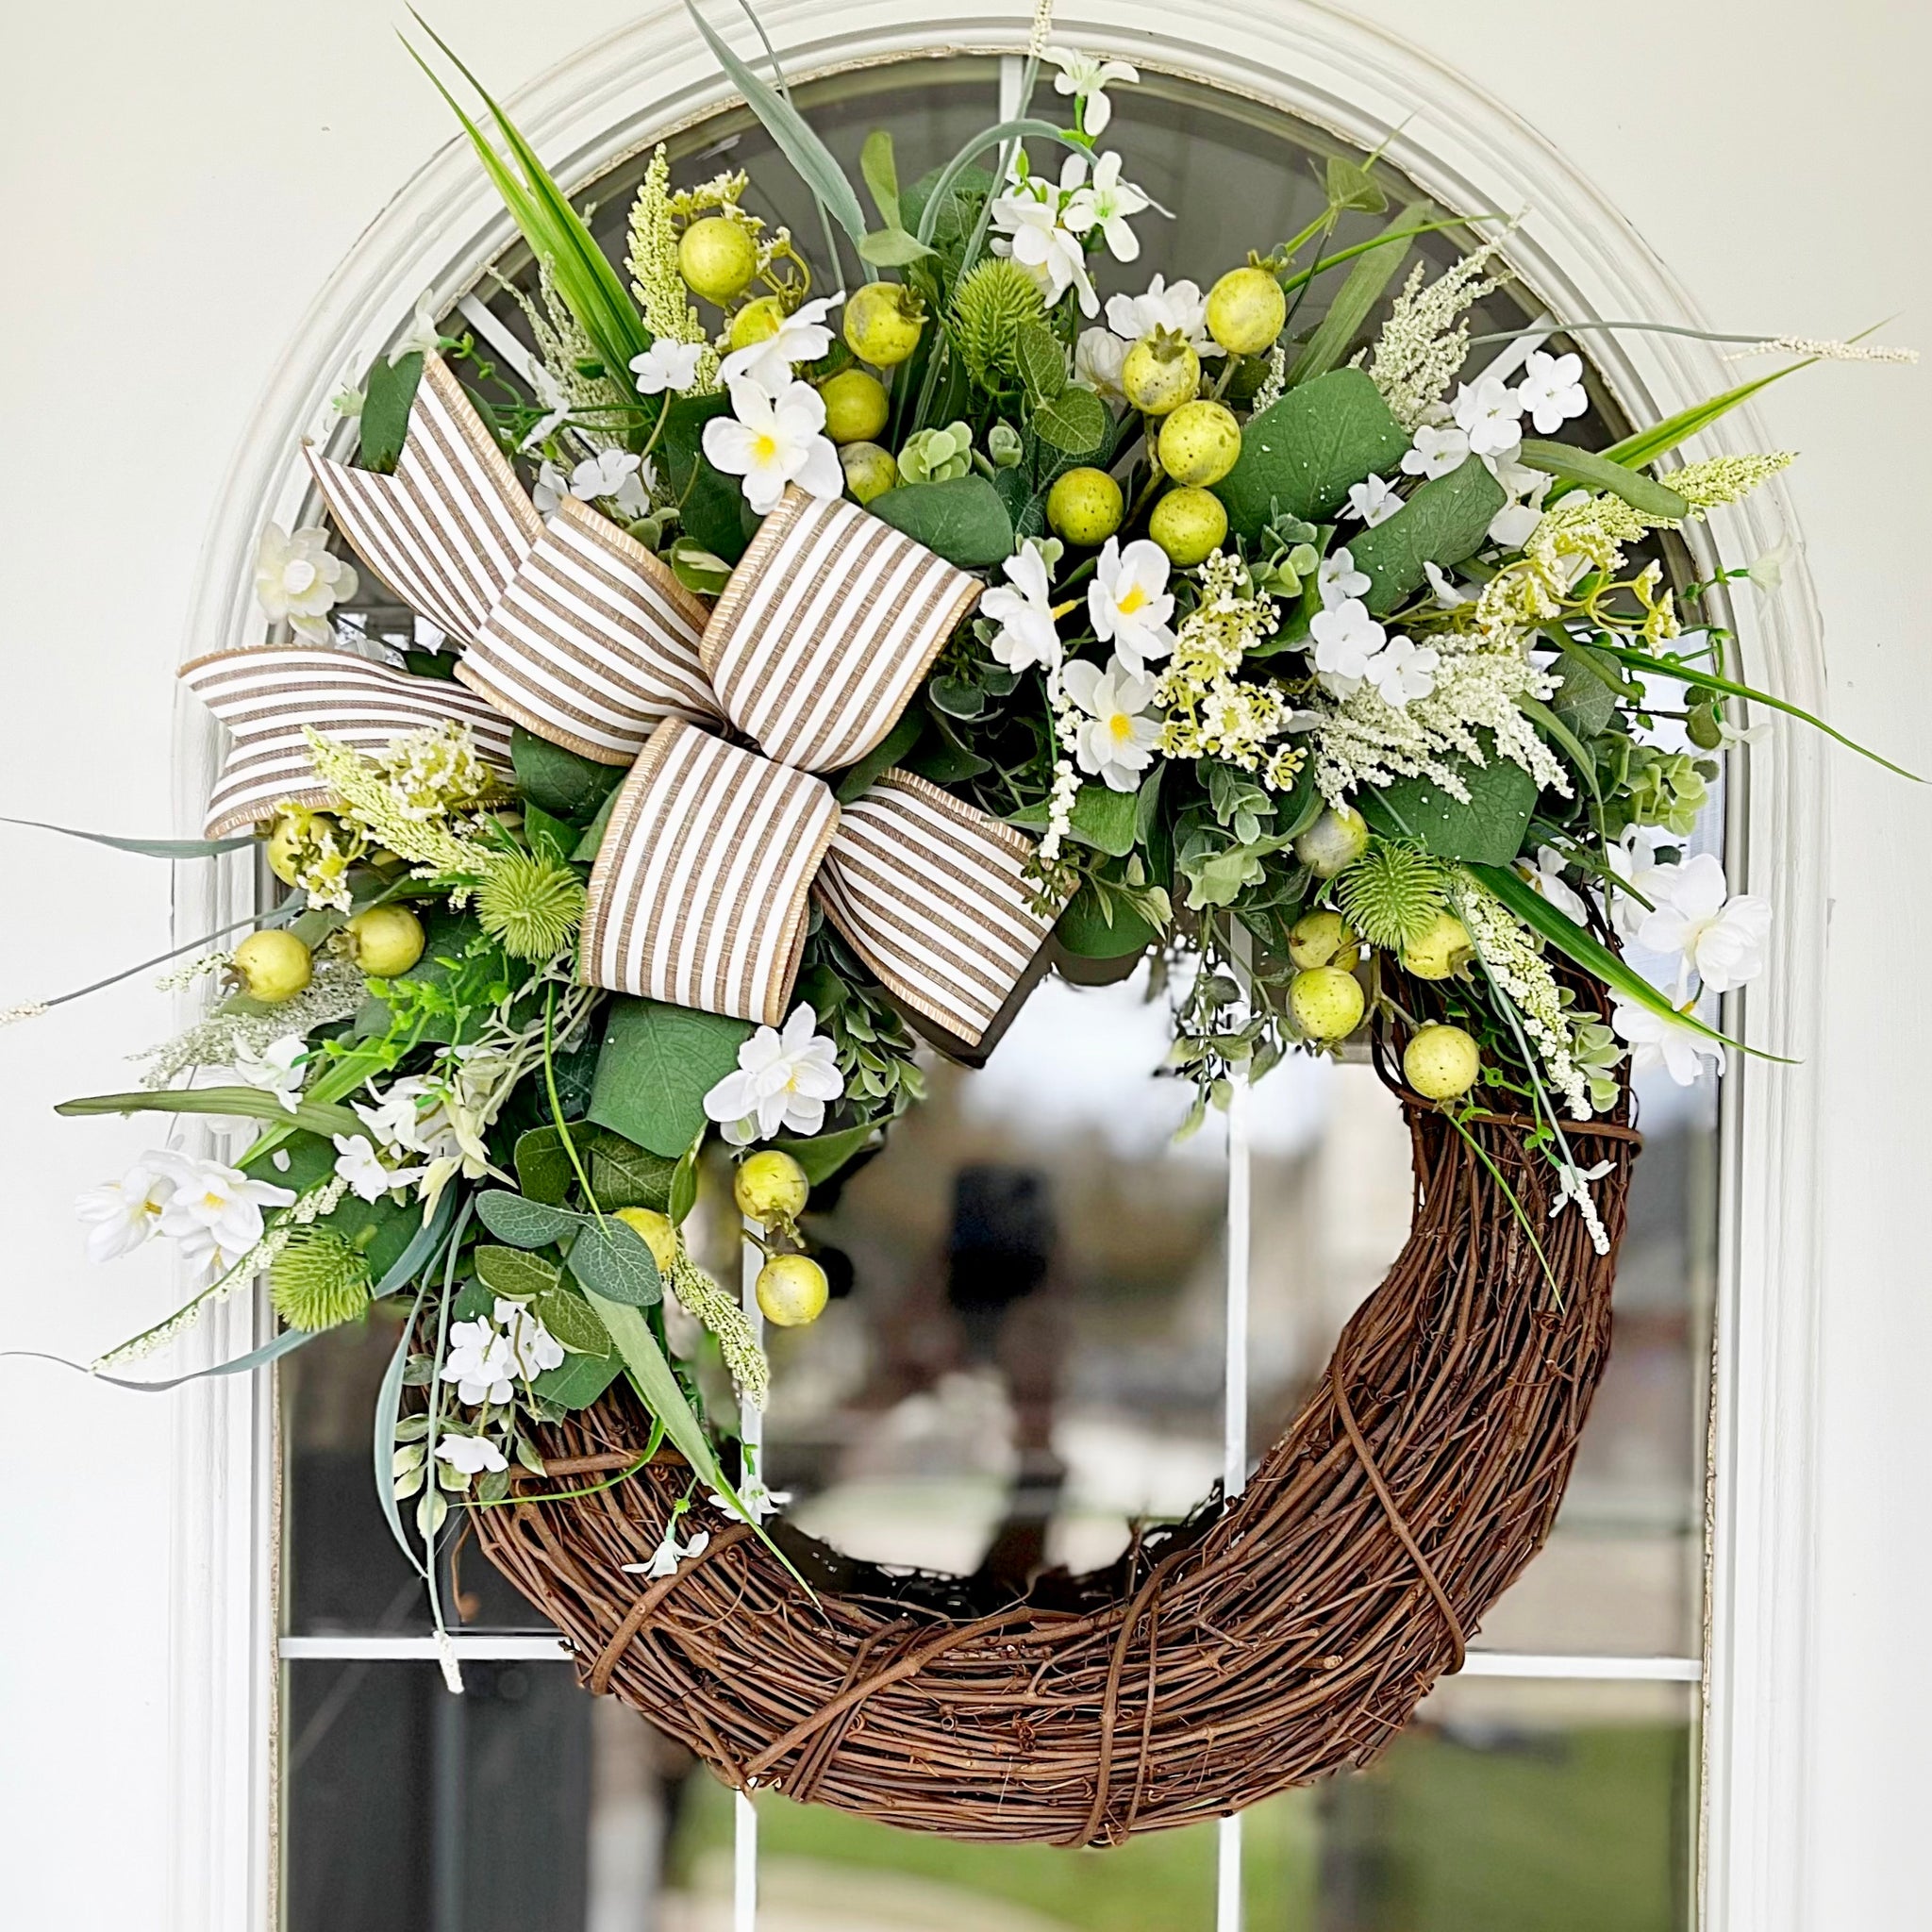 Summer Wreath Spring Wreath Everyday Spring Greens & Blossoms with Green Crab Apple Berries and Striped Ribbon Welcome Farmhouse Front Door